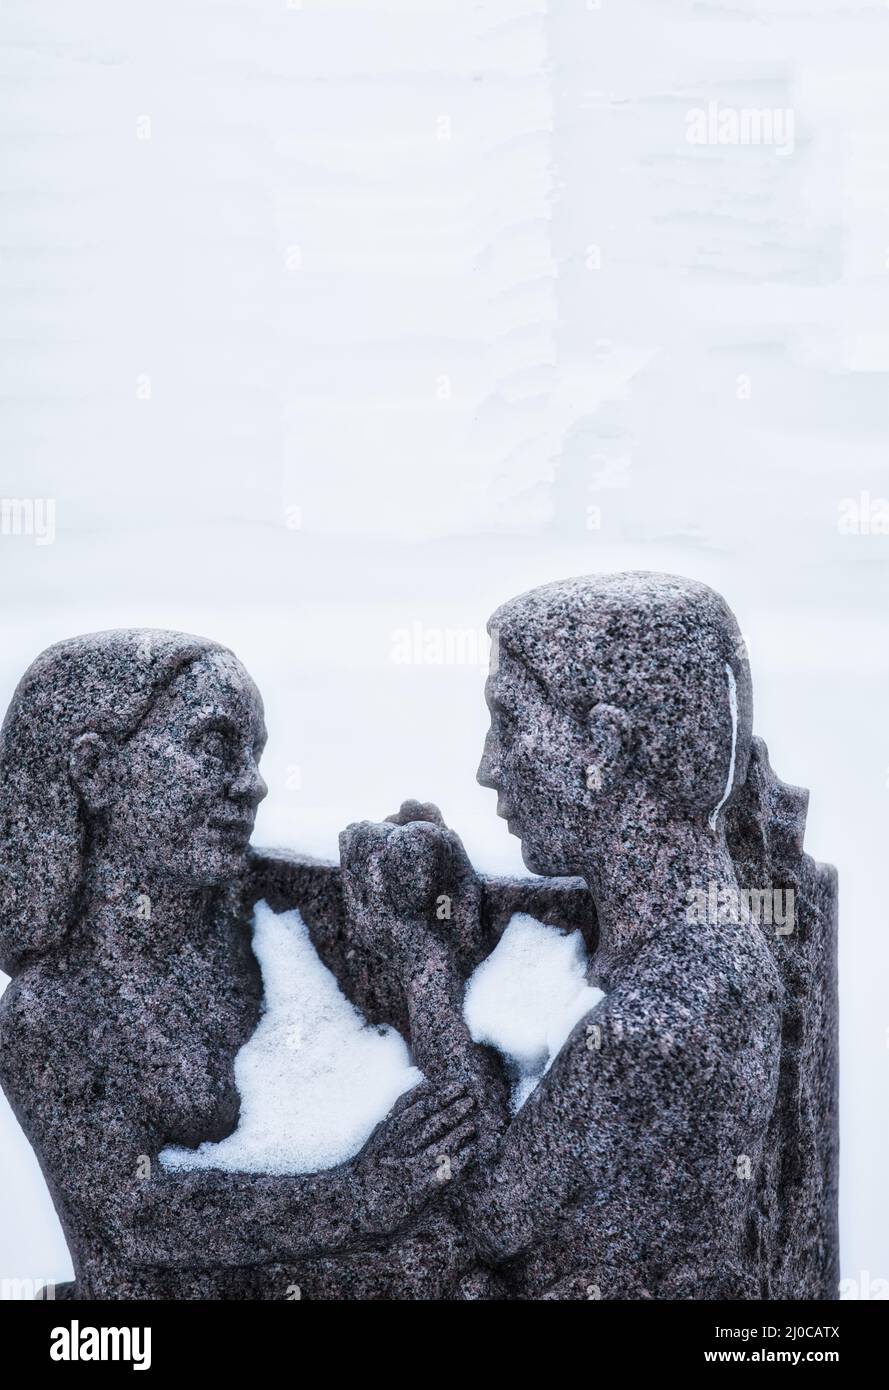 Snow on two carved figures part of 'Morgon' by Ivar Johnsson 1962, Brantingtorget, Gamla Stan, Stockholm, Sweden Stock Photo